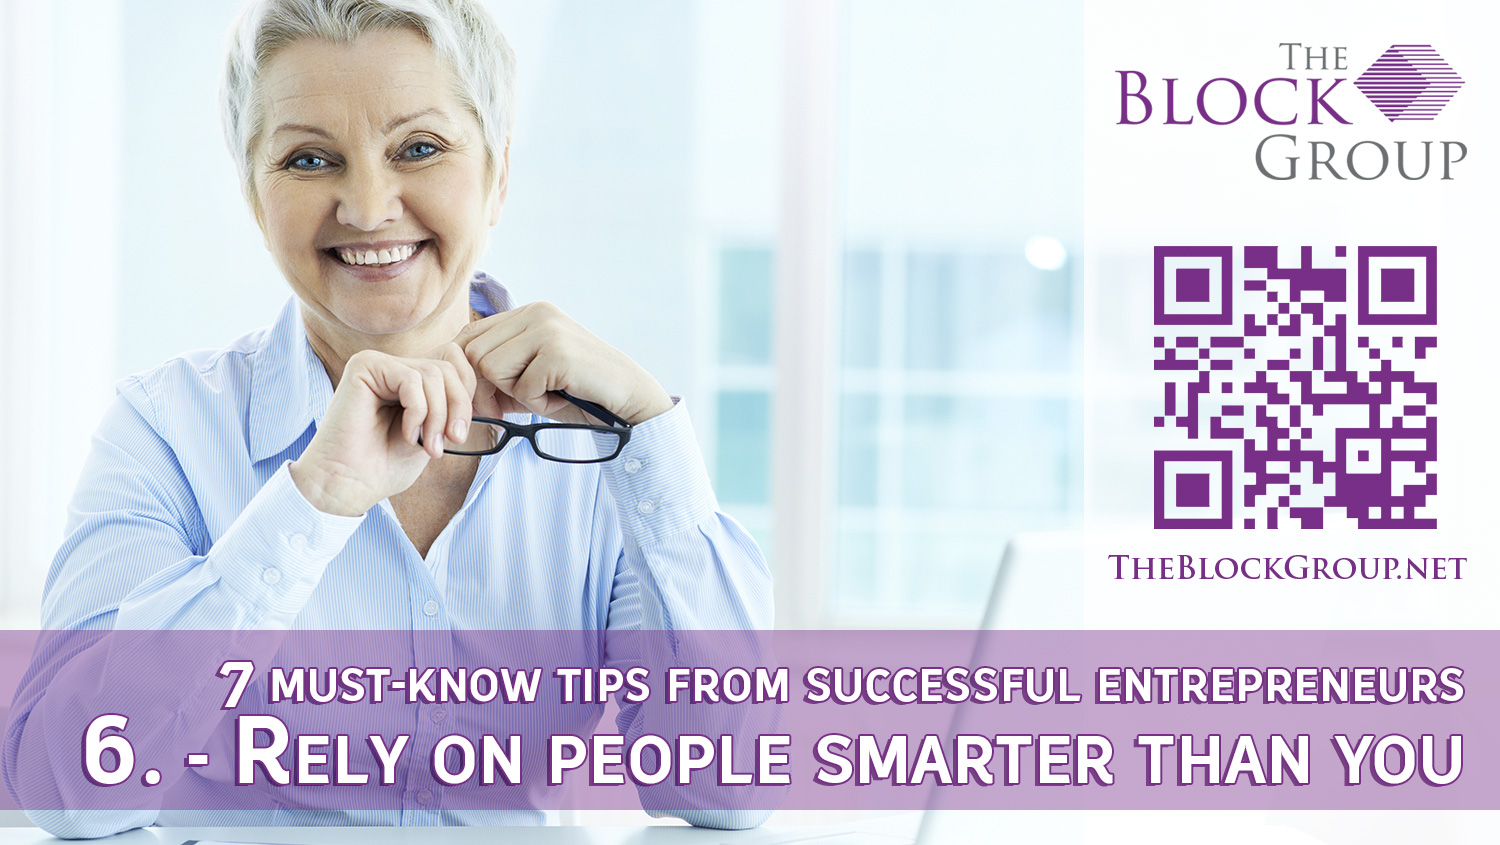 045-6-Rely-on-people-smarter-than-you